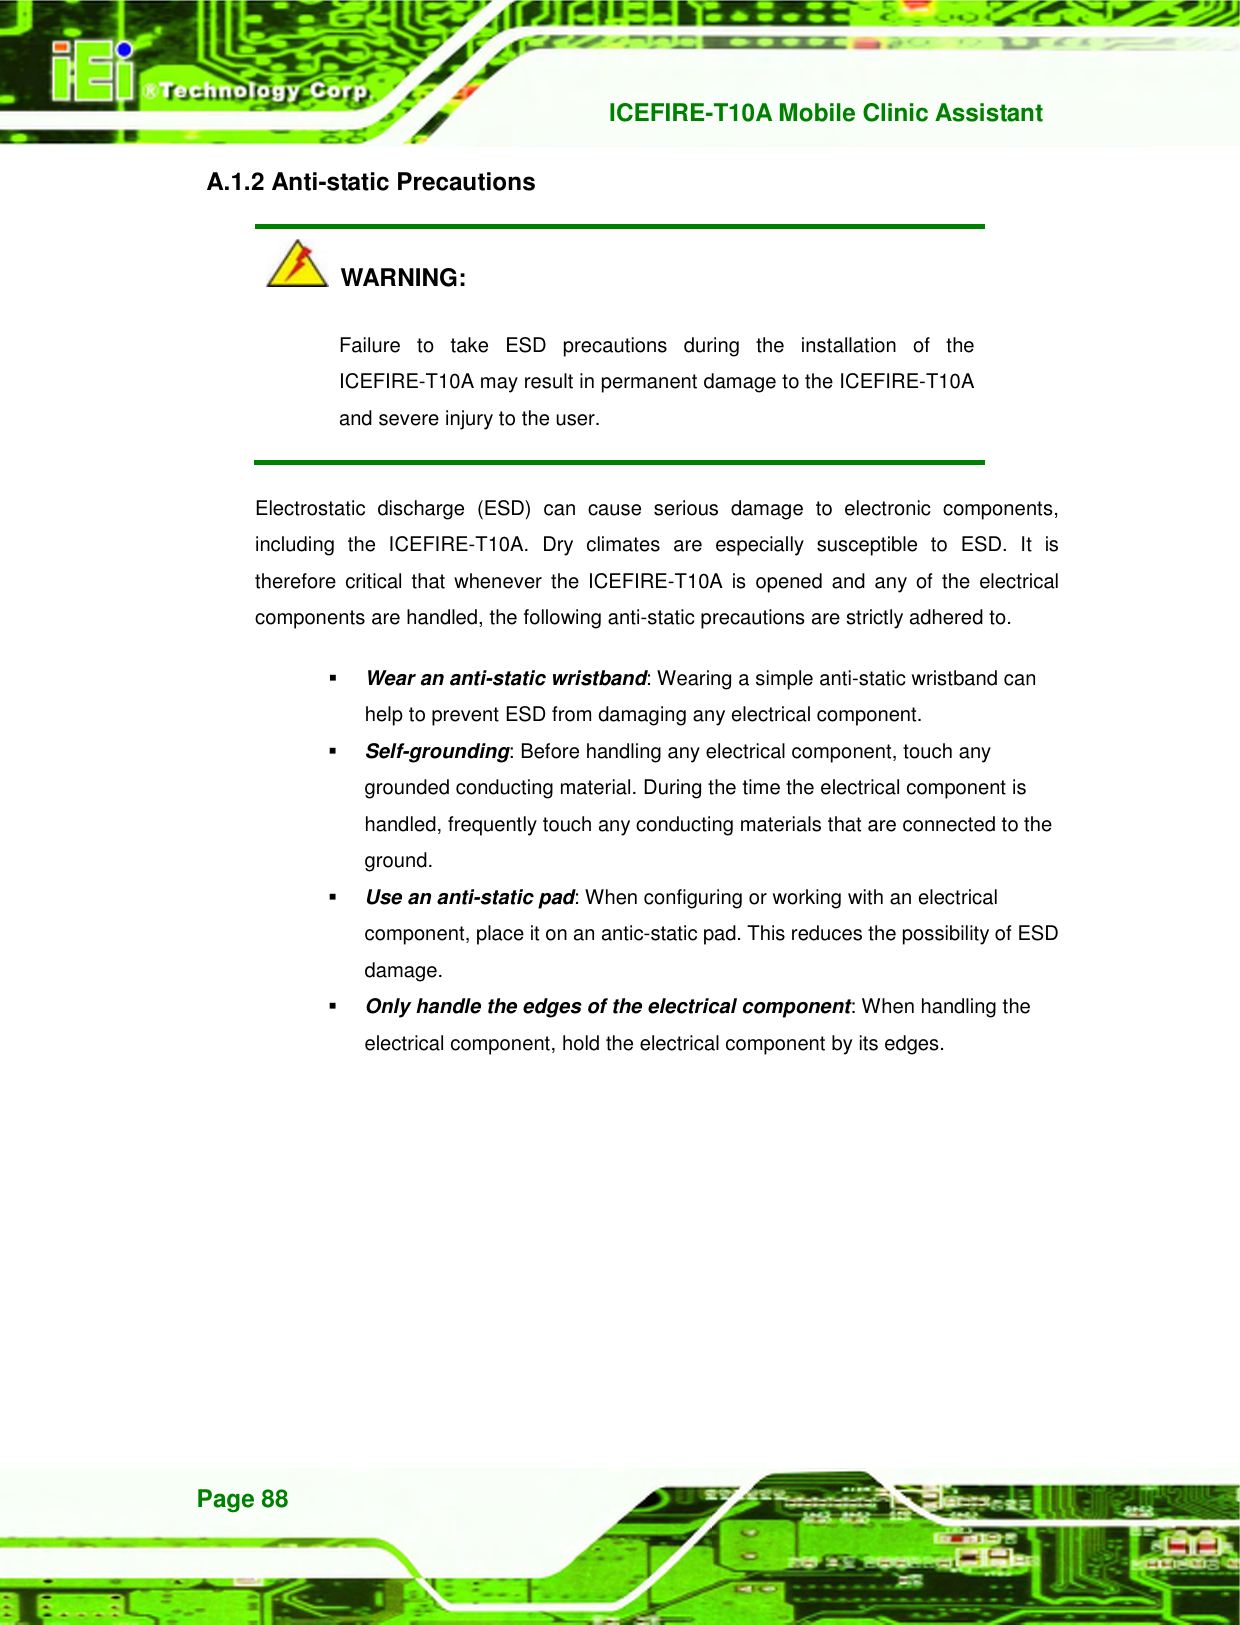   ICEFIRE-T10A Mobile Clinic Assistant Page 88 A.1.2 Anti-static Precautions   WARNING: Failure  to  take  ESD  precautions  during  the  installation  of  the ICEFIRE-T10A may result in permanent damage to the ICEFIRE-T10A and severe injury to the user.   Electrostatic  discharge  (ESD)  can  cause  serious  damage  to  electronic  components, including  the  ICEFIRE-T10A.  Dry  climates  are  especially  susceptible  to  ESD.  It  is therefore  critical that  whenever  the  ICEFIRE-T10A  is  opened  and  any of  the electrical components are handled, the following anti-static precautions are strictly adhered to.  Wear an anti-static wristband: Wearing a simple anti-static wristband can help to prevent ESD from damaging any electrical component.  Self-grounding: Before handling any electrical component, touch any grounded conducting material. During the time the electrical component is handled, frequently touch any conducting materials that are connected to the ground.  Use an anti-static pad: When configuring or working with an electrical component, place it on an antic-static pad. This reduces the possibility of ESD damage.  Only handle the edges of the electrical component: When handling the electrical component, hold the electrical component by its edges. 